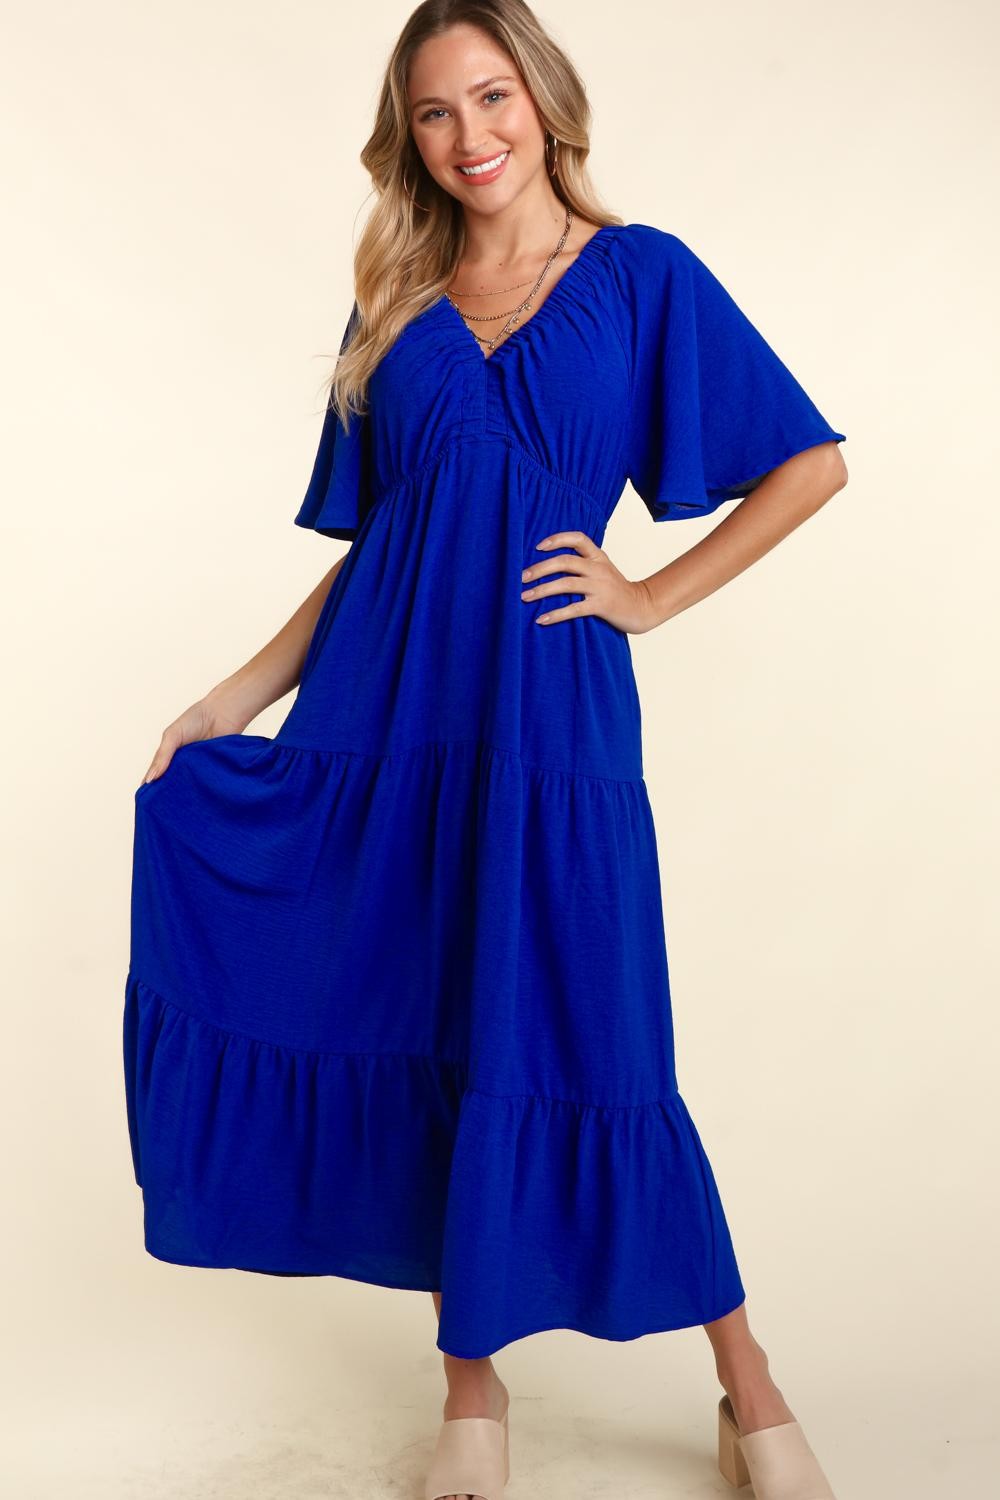 Royal Blue Tiered Babydoll Maxi Dress with Side Pocket